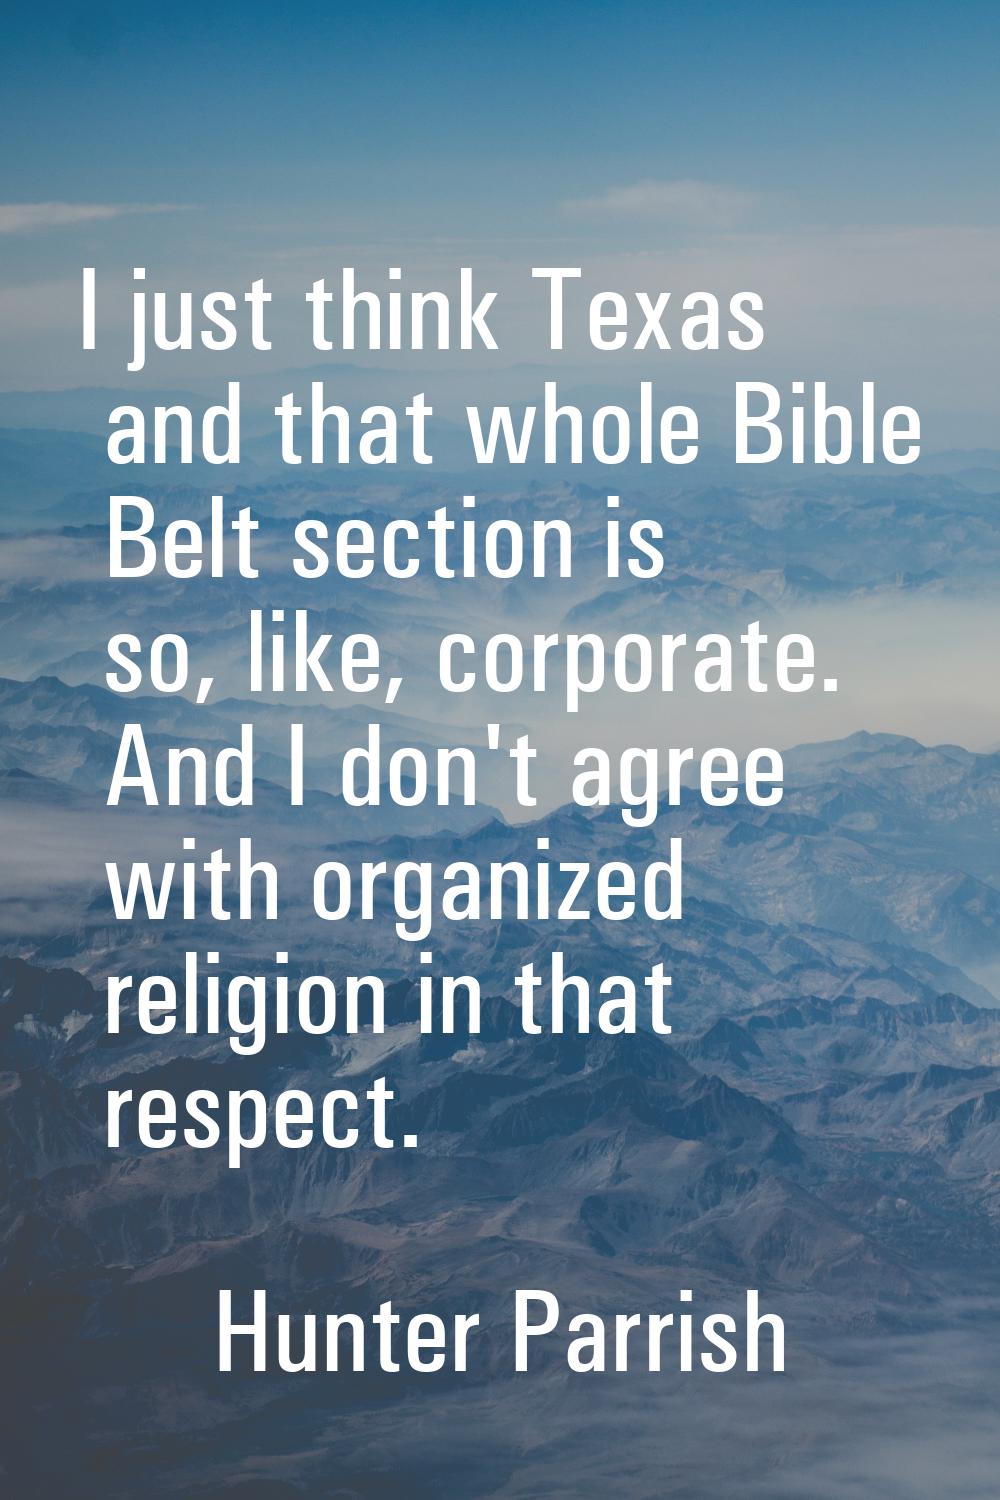 I just think Texas and that whole Bible Belt section is so, like, corporate. And I don't agree with